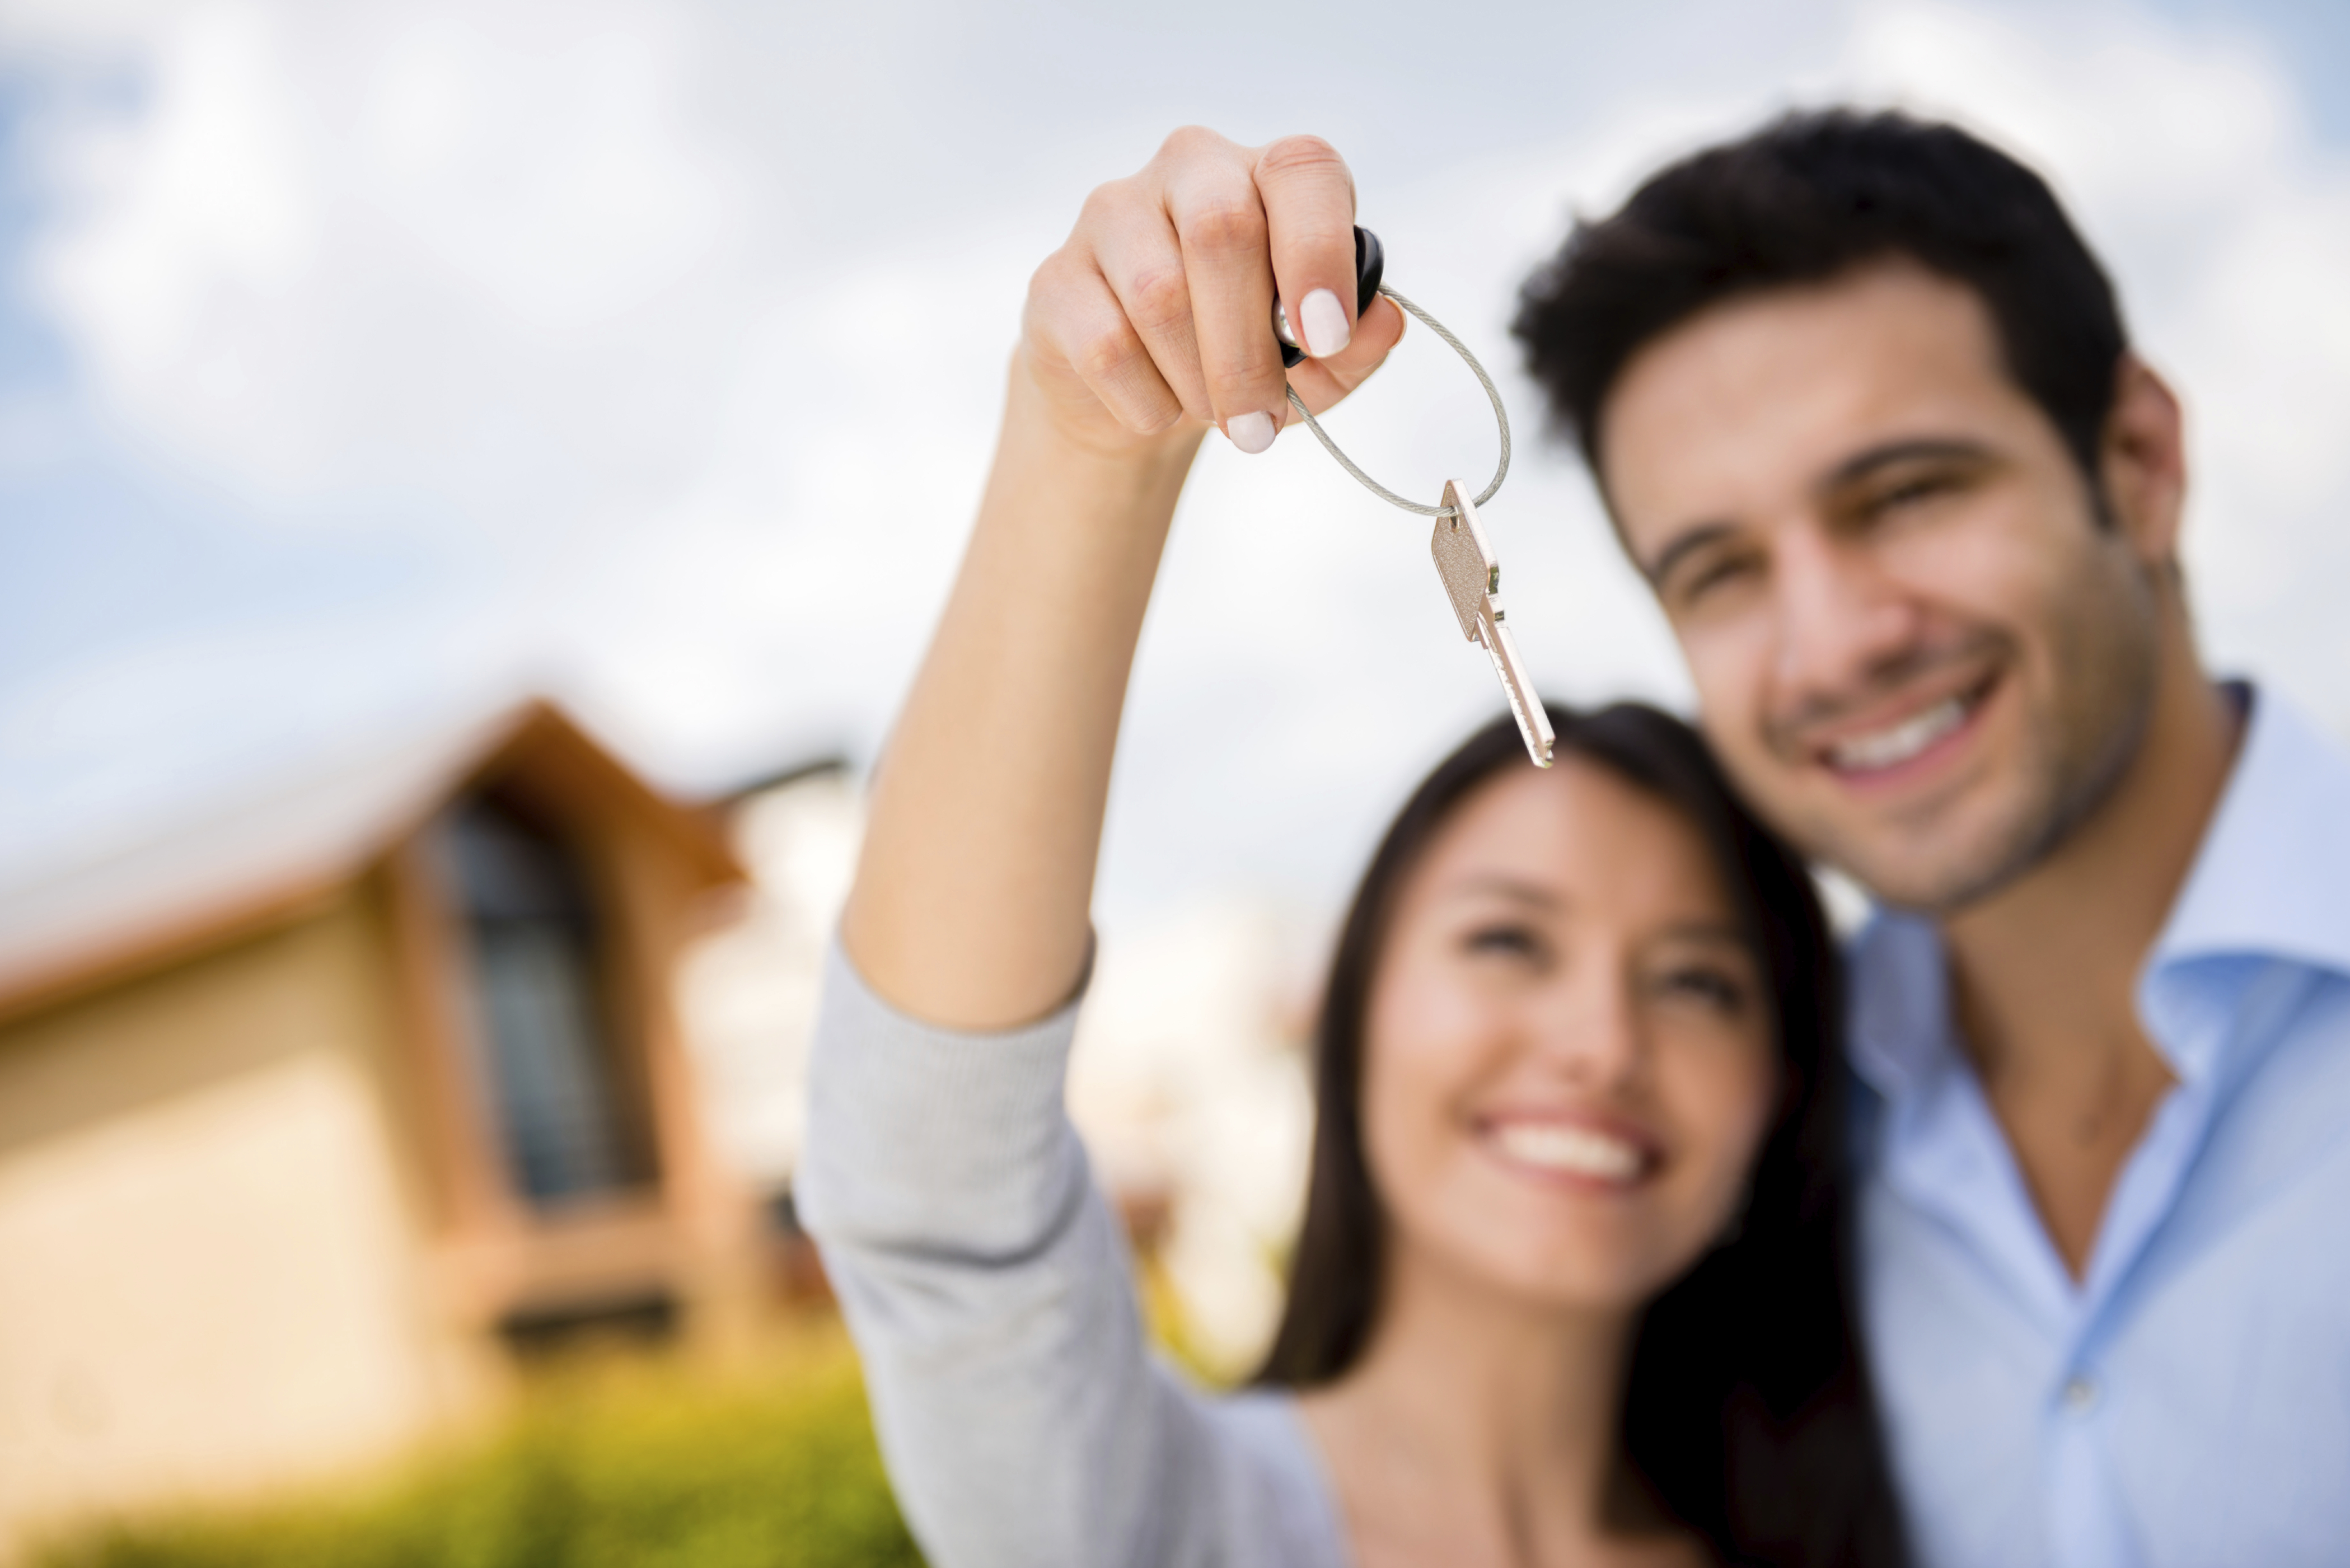 Getting the right home for you